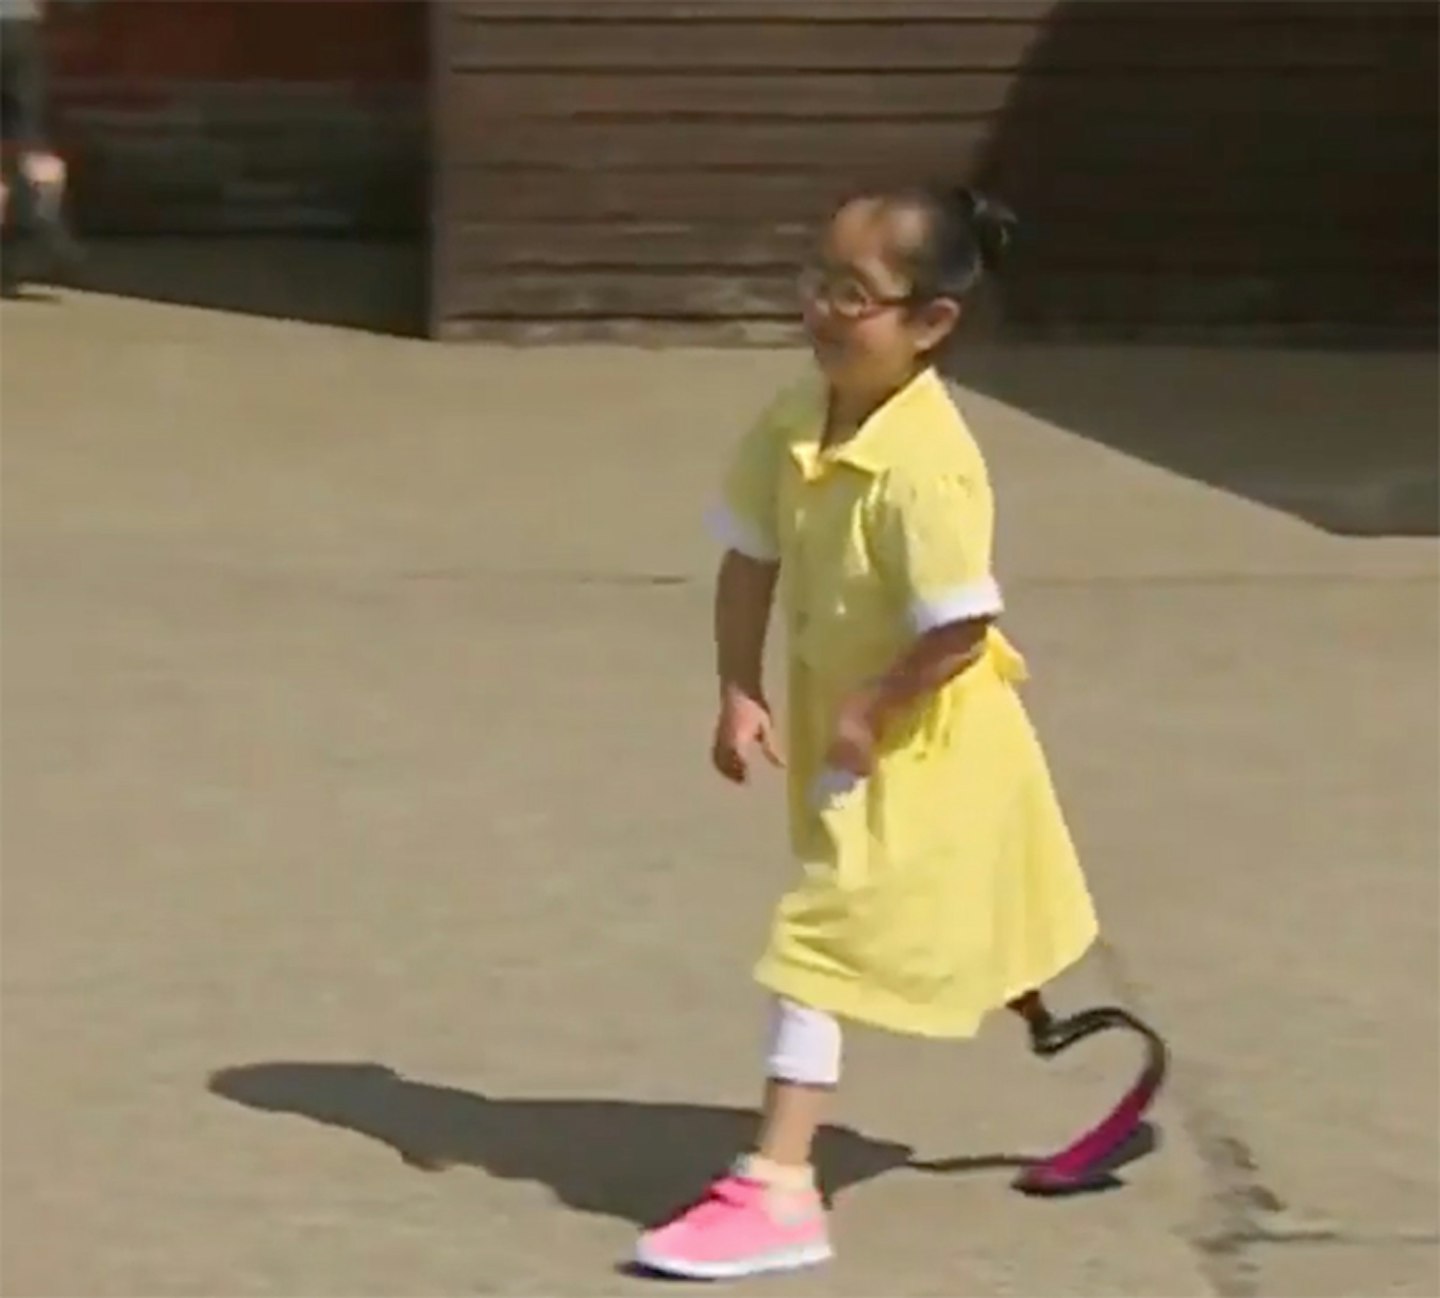 7-year-old-girl-shows-friends-new-prosthetic-leg-first-time-anu-birmingham copy